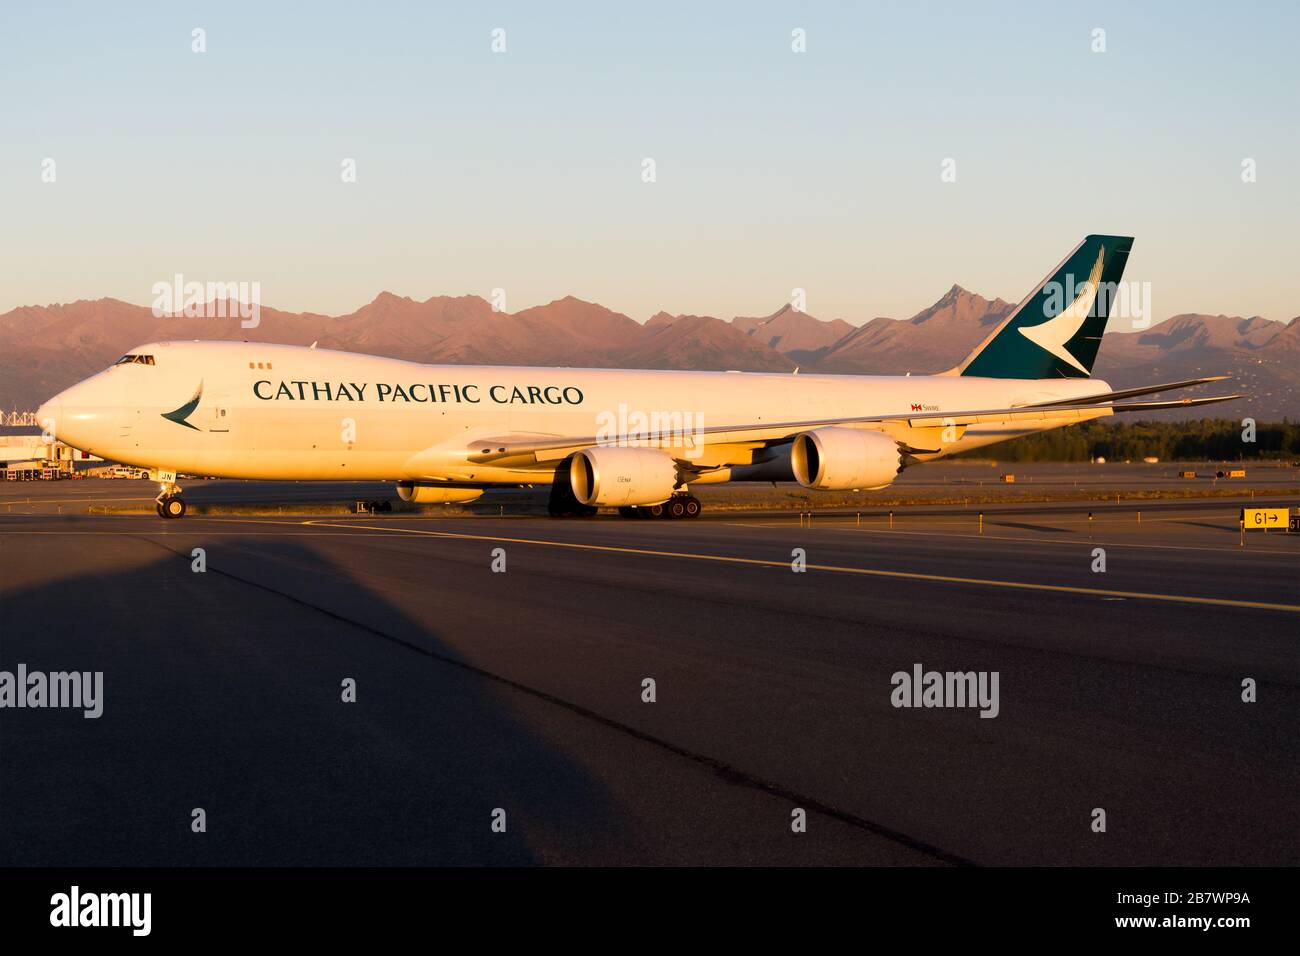 Cathay Pacific Cargo Boeing 747 freighter taxiing after arrival from Hong Kong Chep Lap Kok. Aircraft in Anchorage B-LJN. Stock Photo